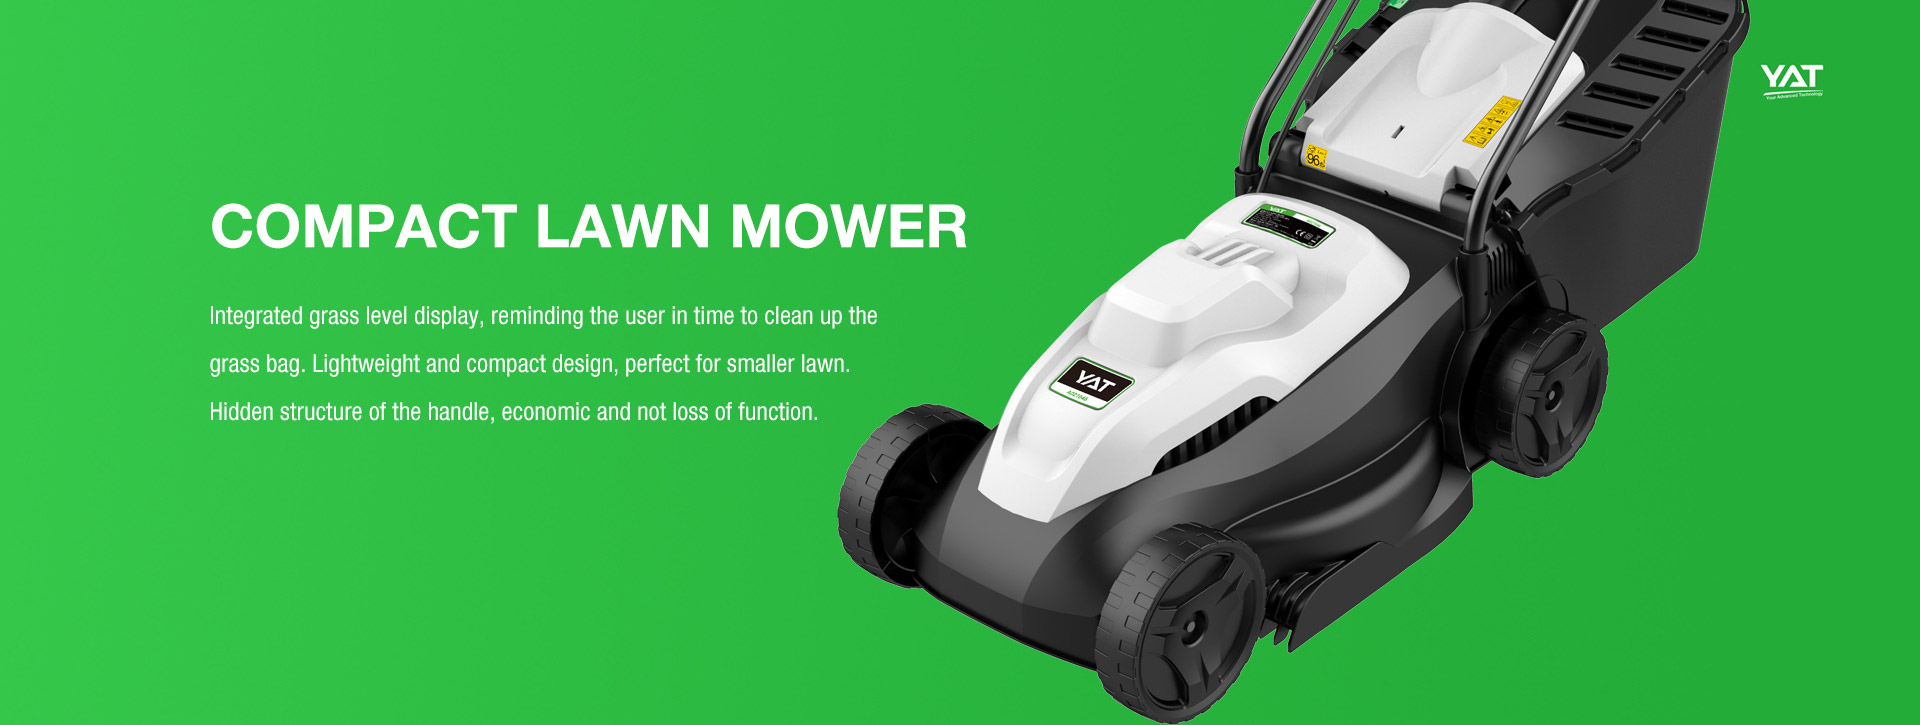 CORDED LAWN MOWER